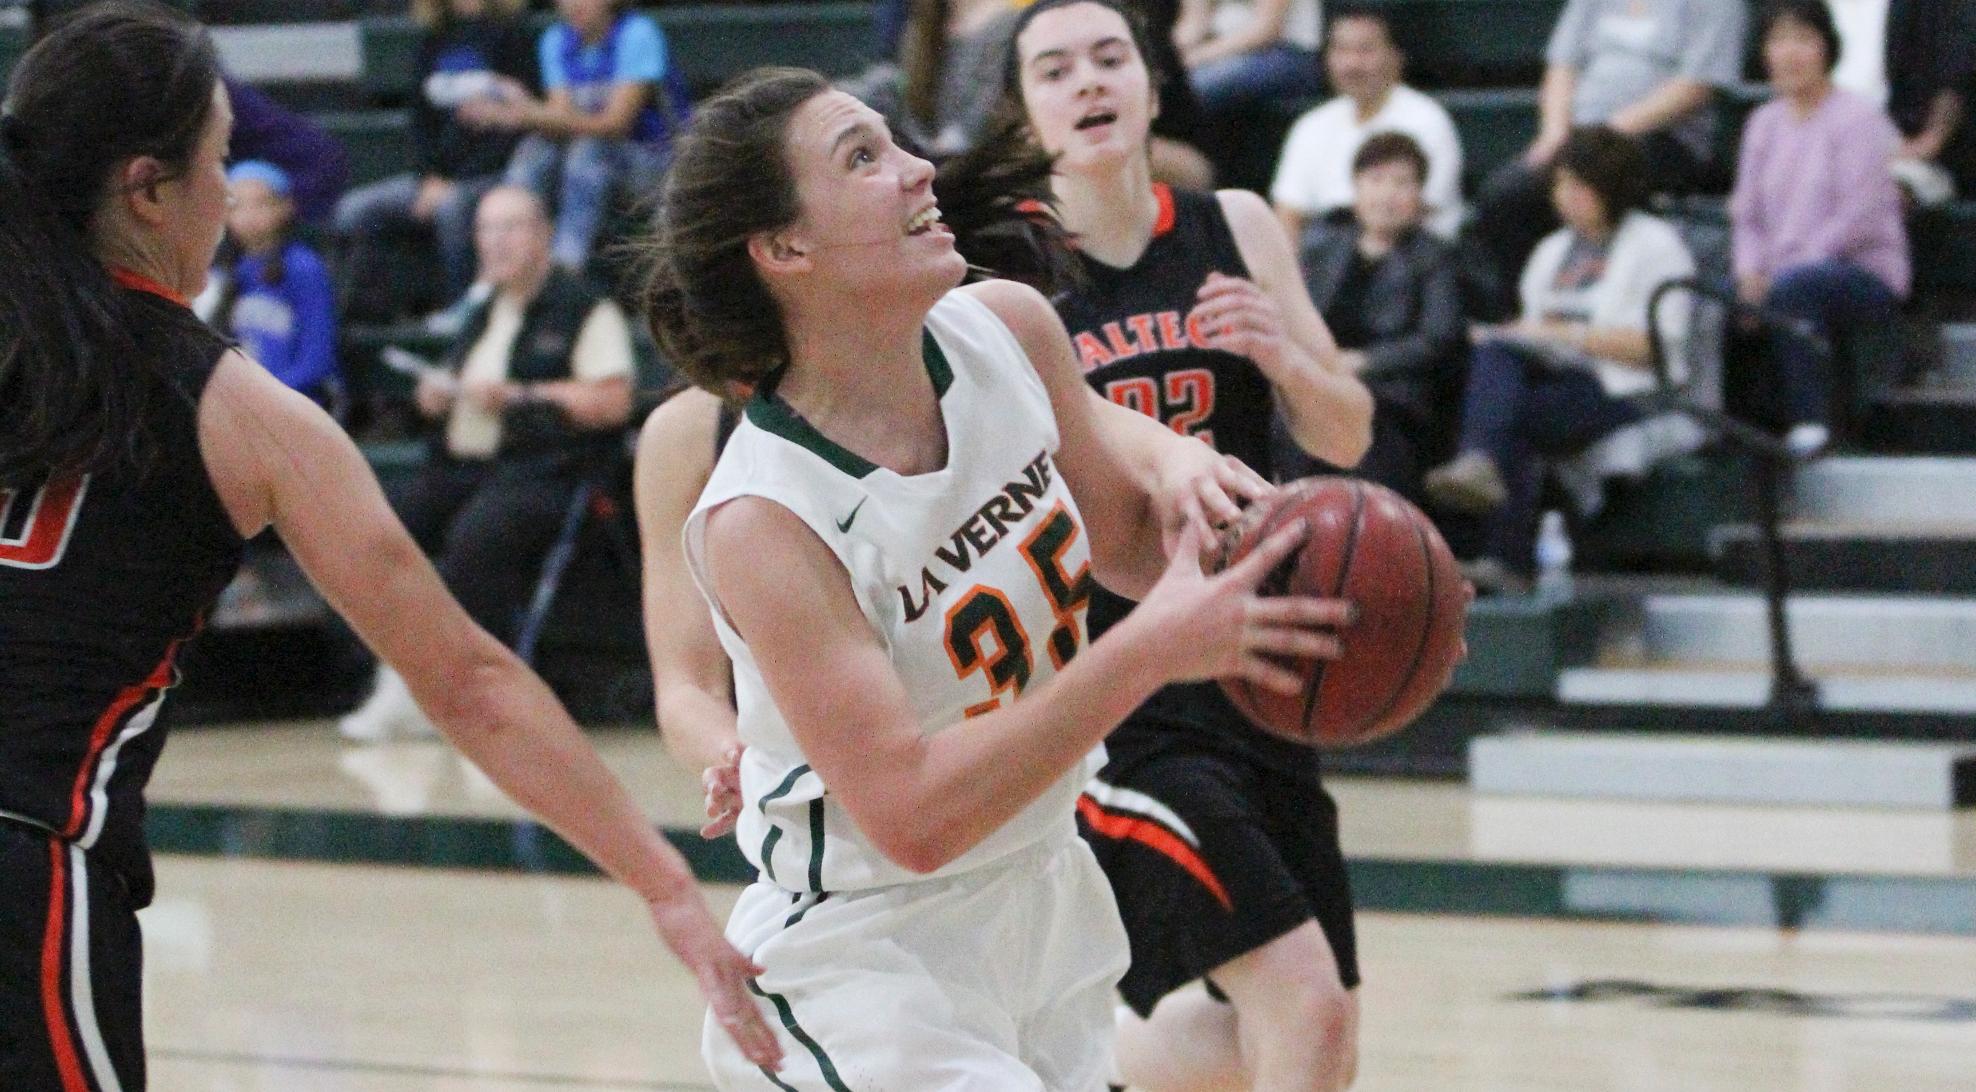 Myers joins 1,000-Point Club, Women’s Basketball tops Oxy